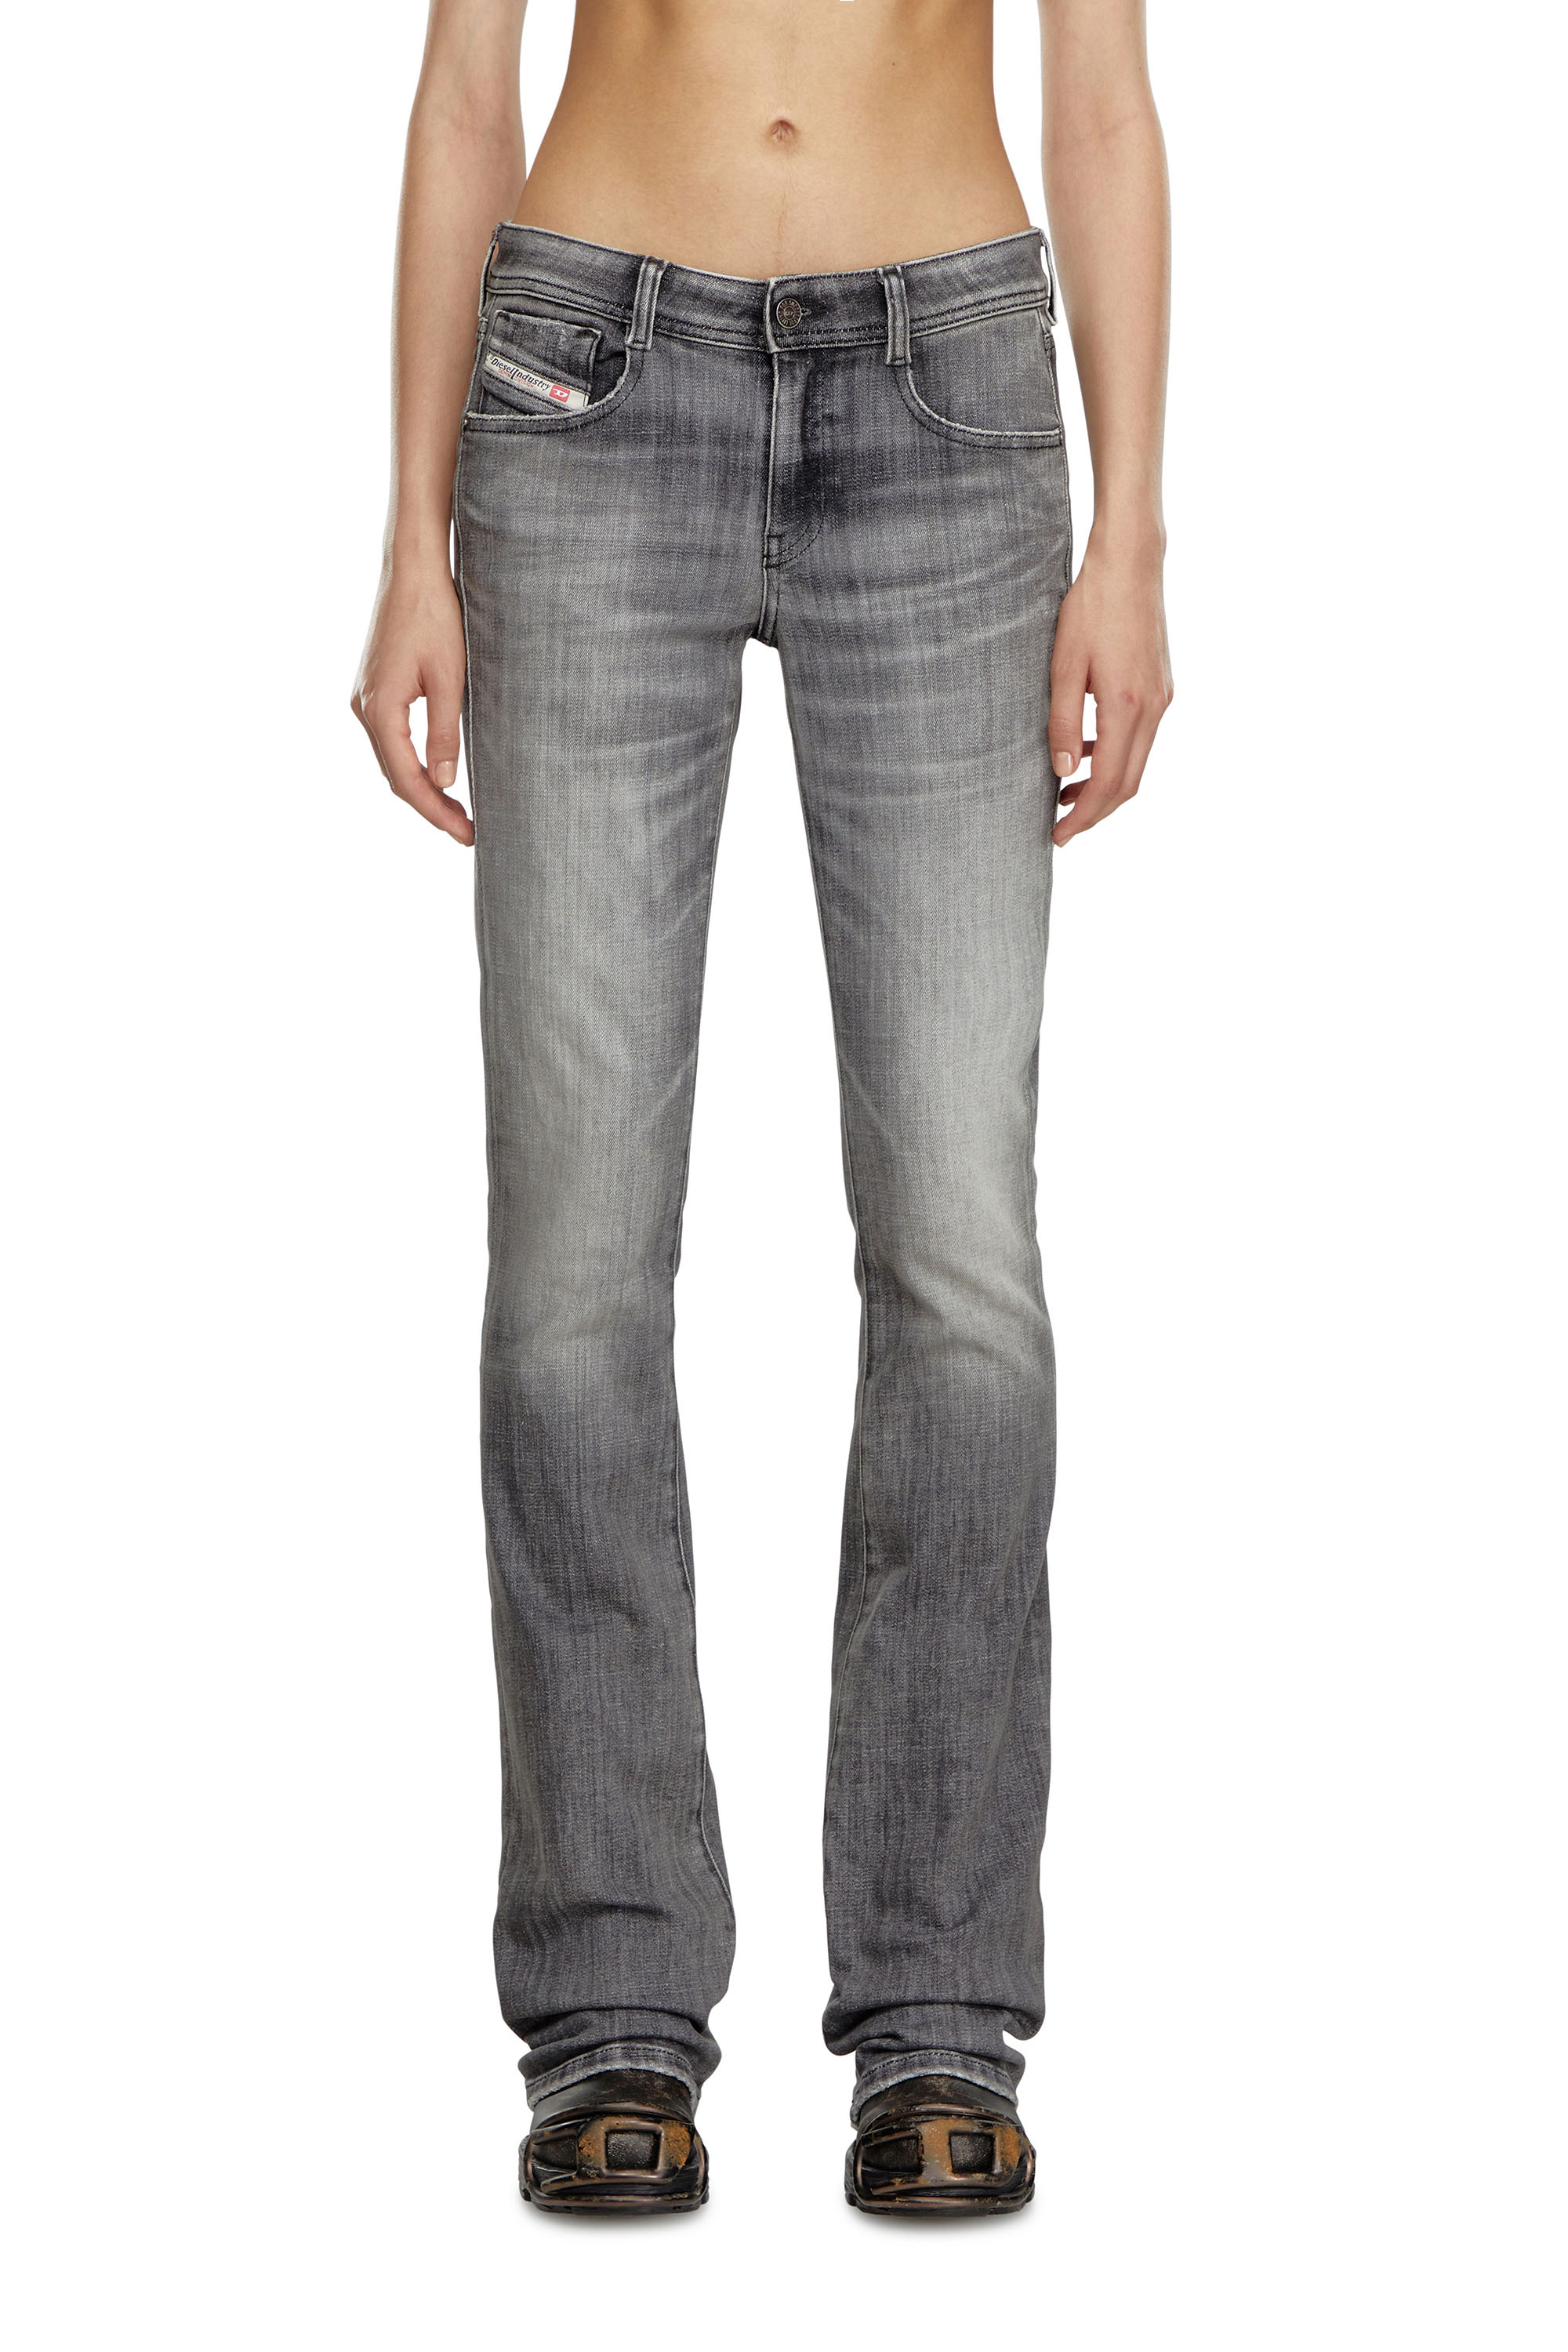 Diesel - Bootcut and Flare Jeans 1969 D-Ebbey 09J29, Mujer Bootcut y Flare Jeans - 1969 D-Ebbey in Gris - Image 2